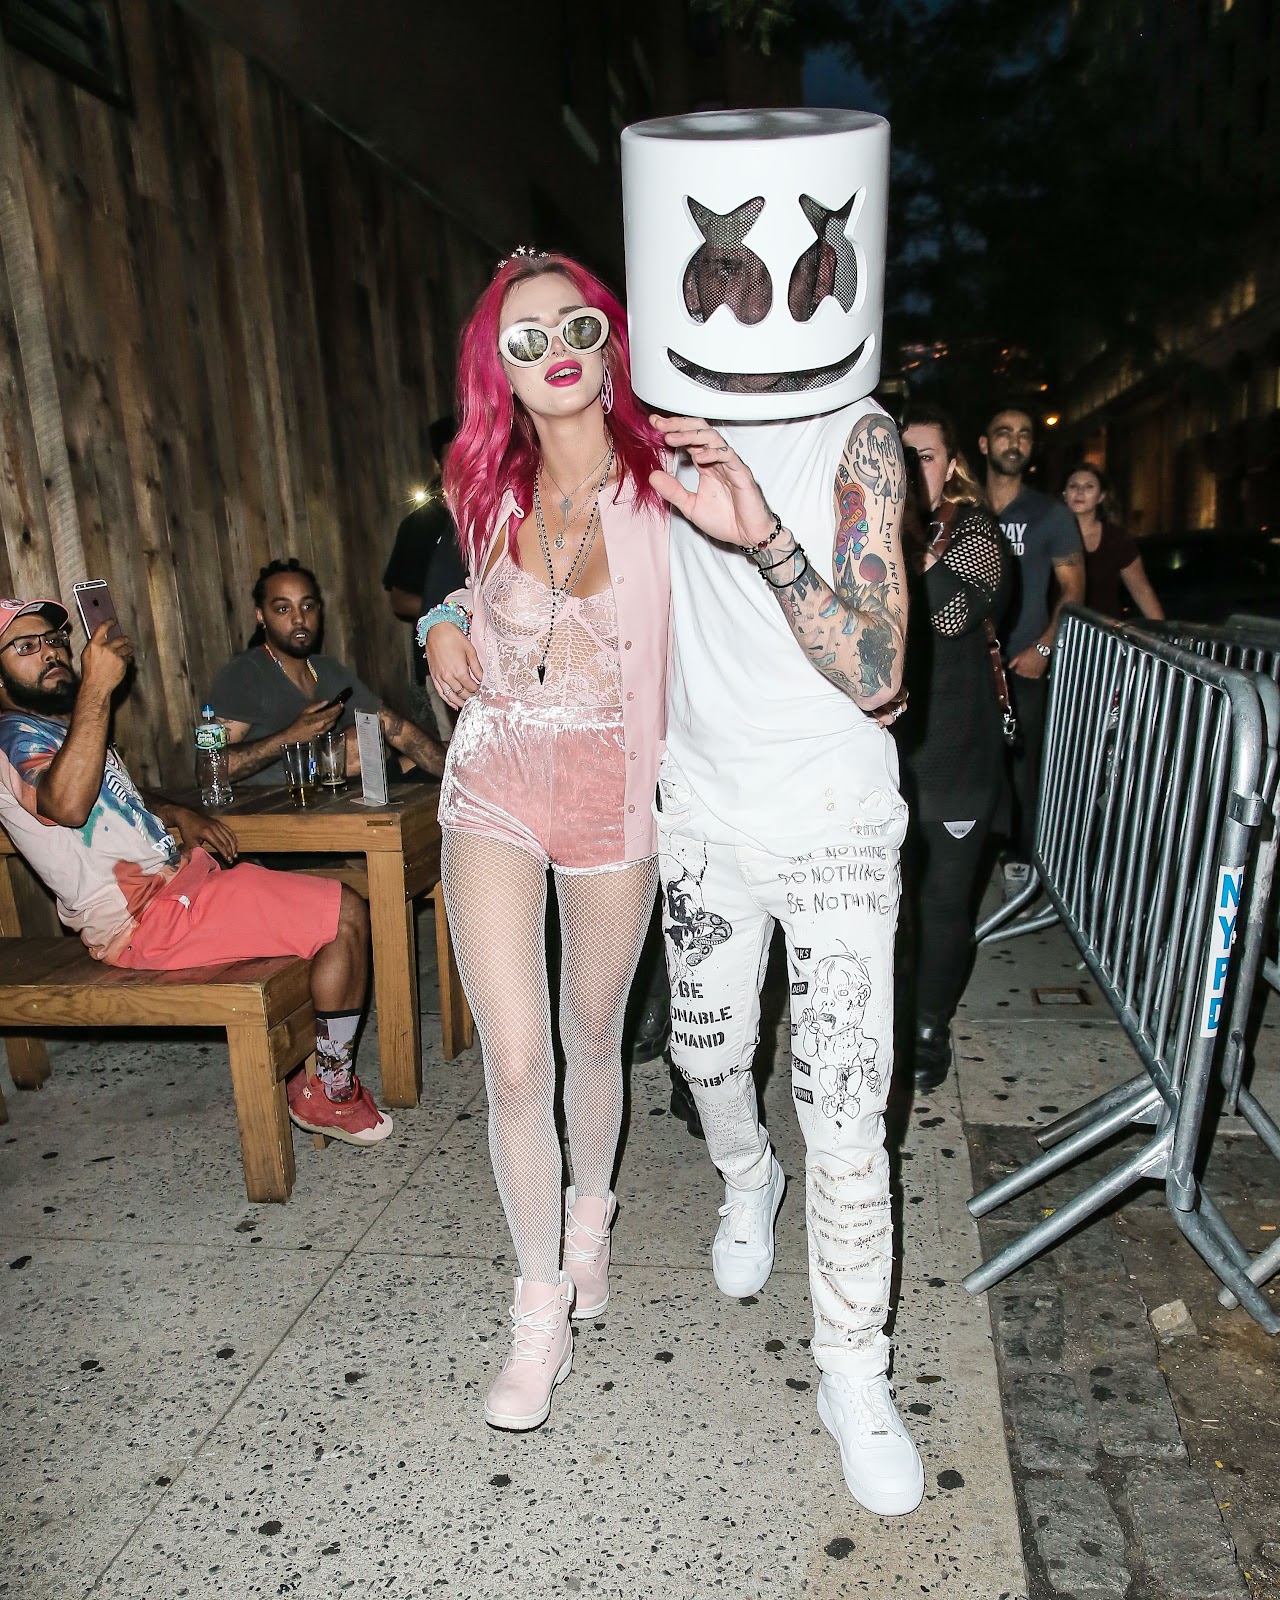 Bella Thorne bares all in see-through lace top as she parties in all-pink outfit in New York